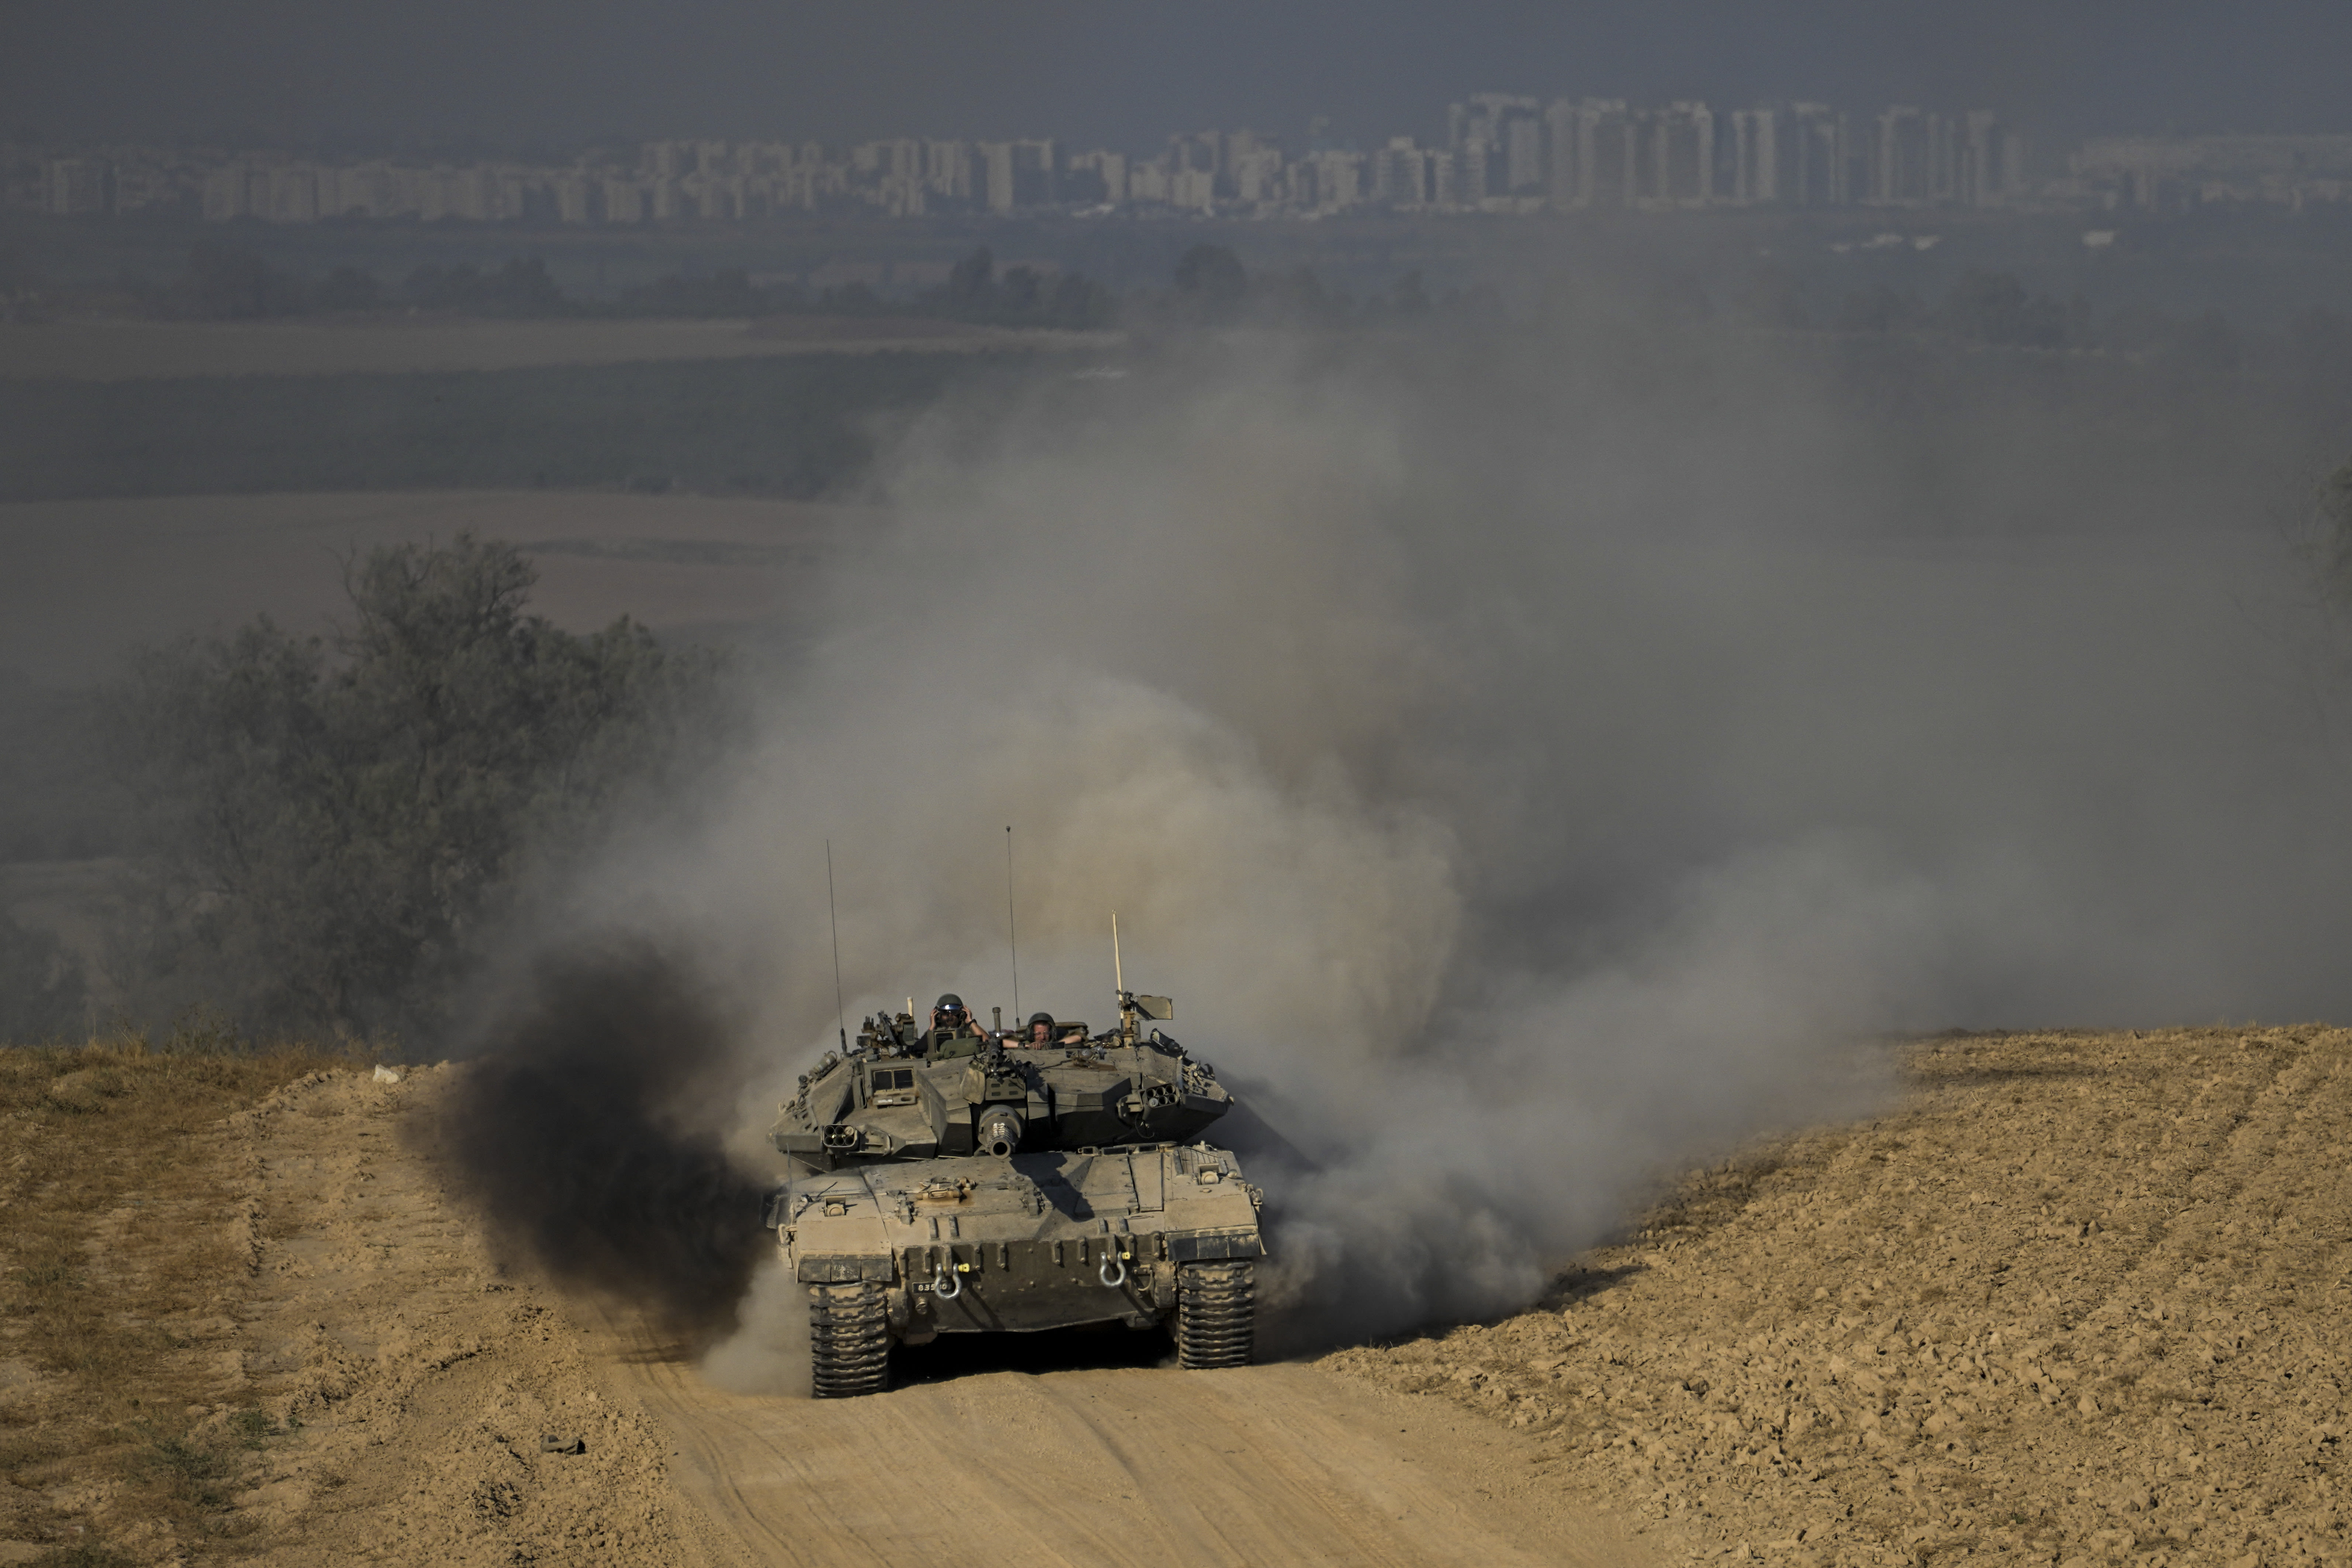 The Latest | Israeli troops launch attacks in central Gaza, possibly widening their offensive